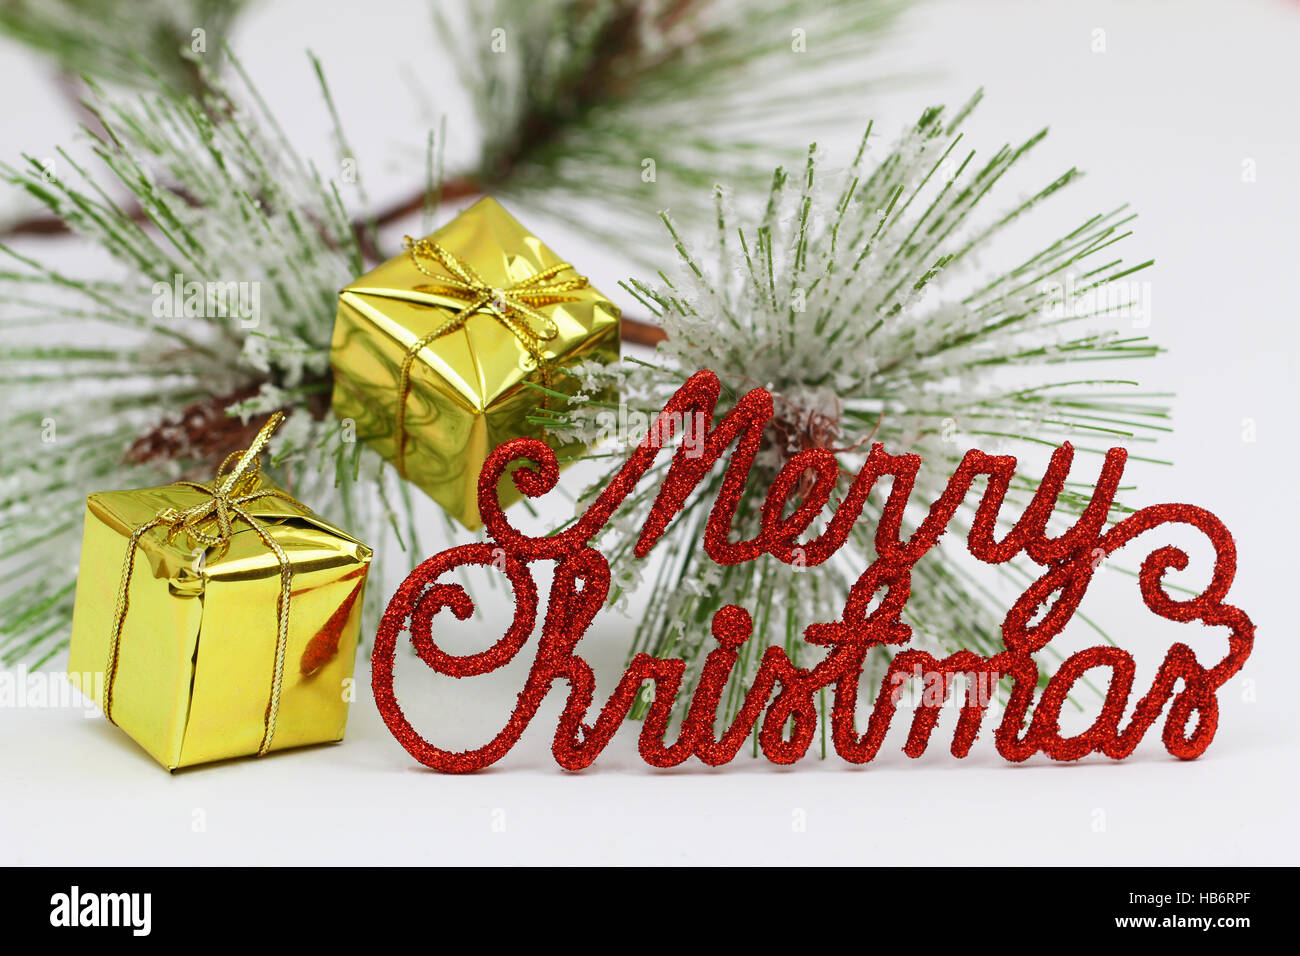 Merry Christmas written with shiny red letters, presents and pine Stock Photo